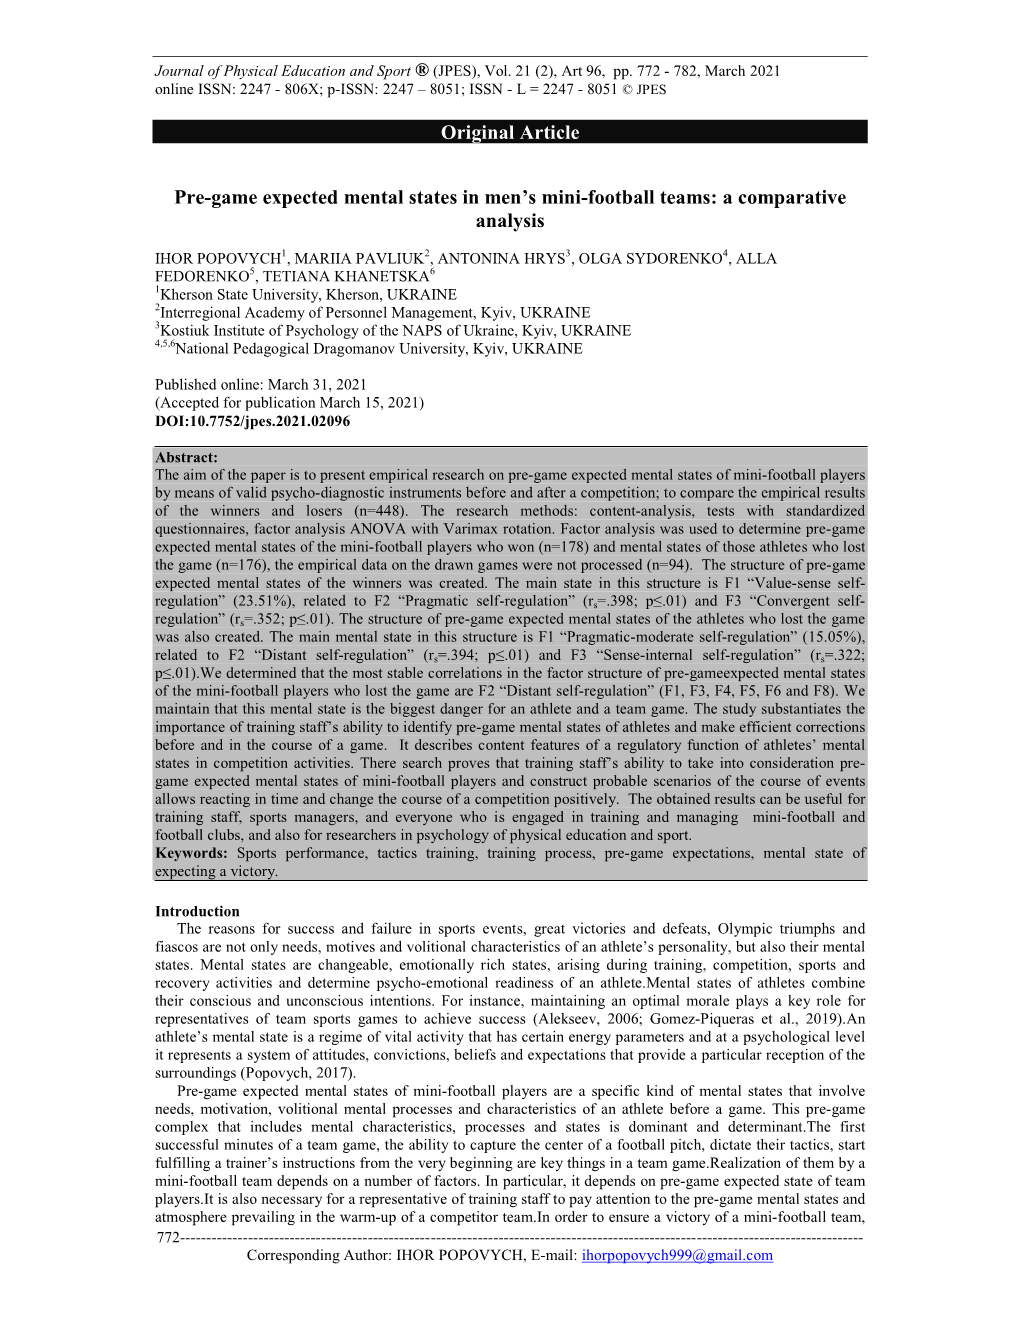 Pre-Game Expected Mental States in Men's Mini-Football Teams